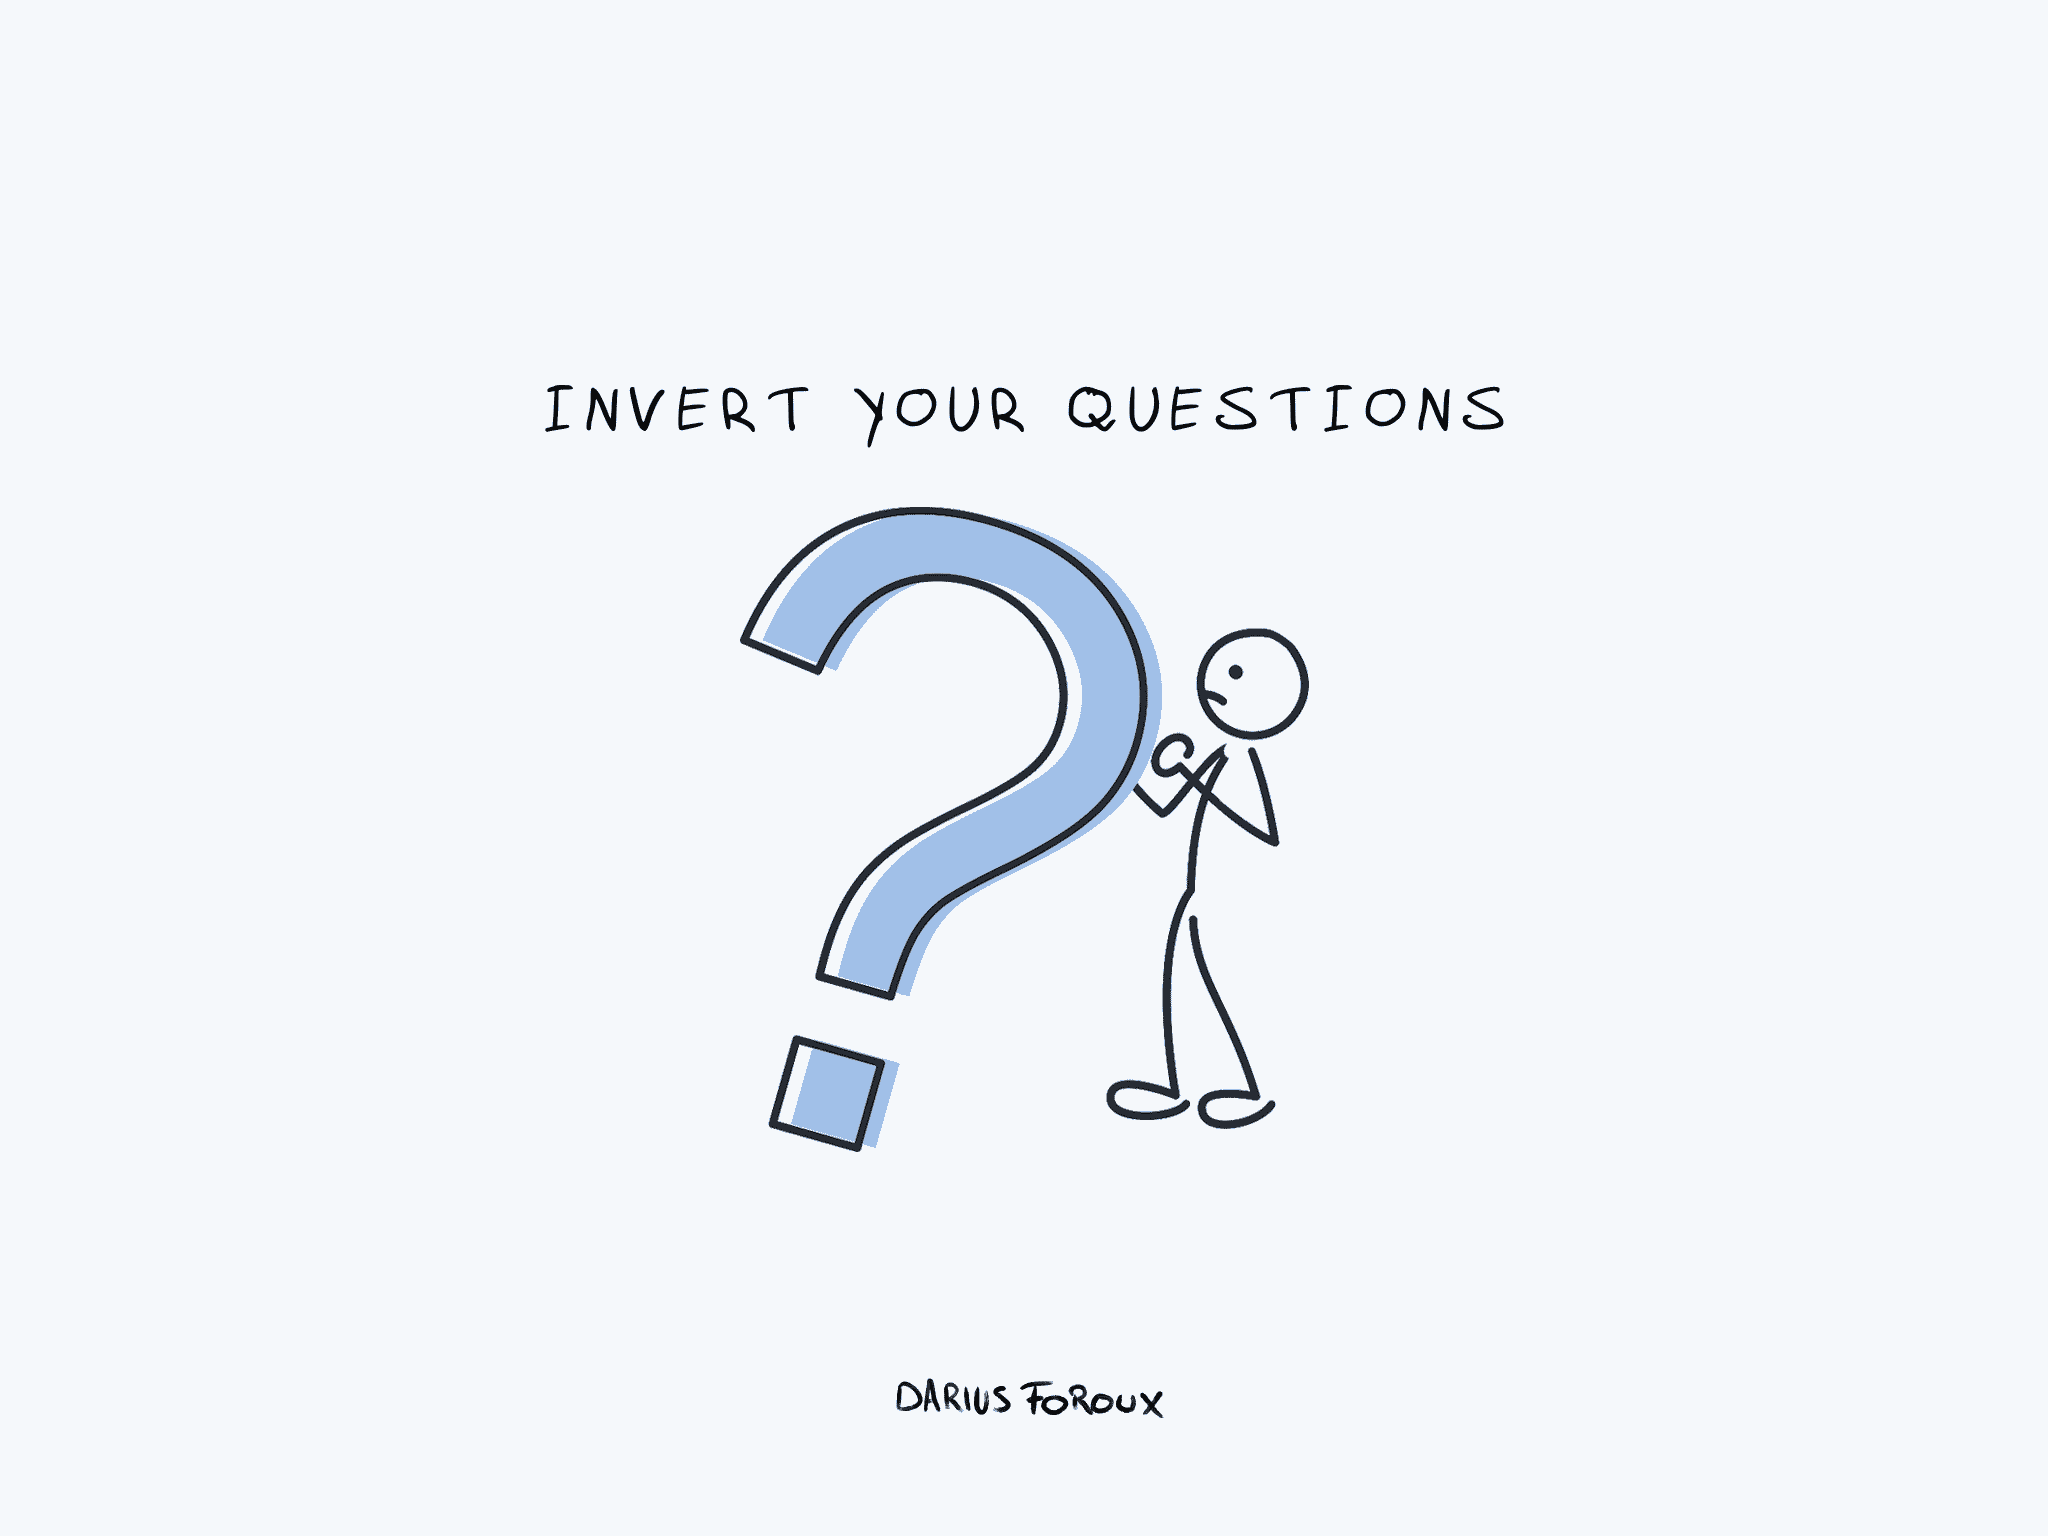 Your Questions